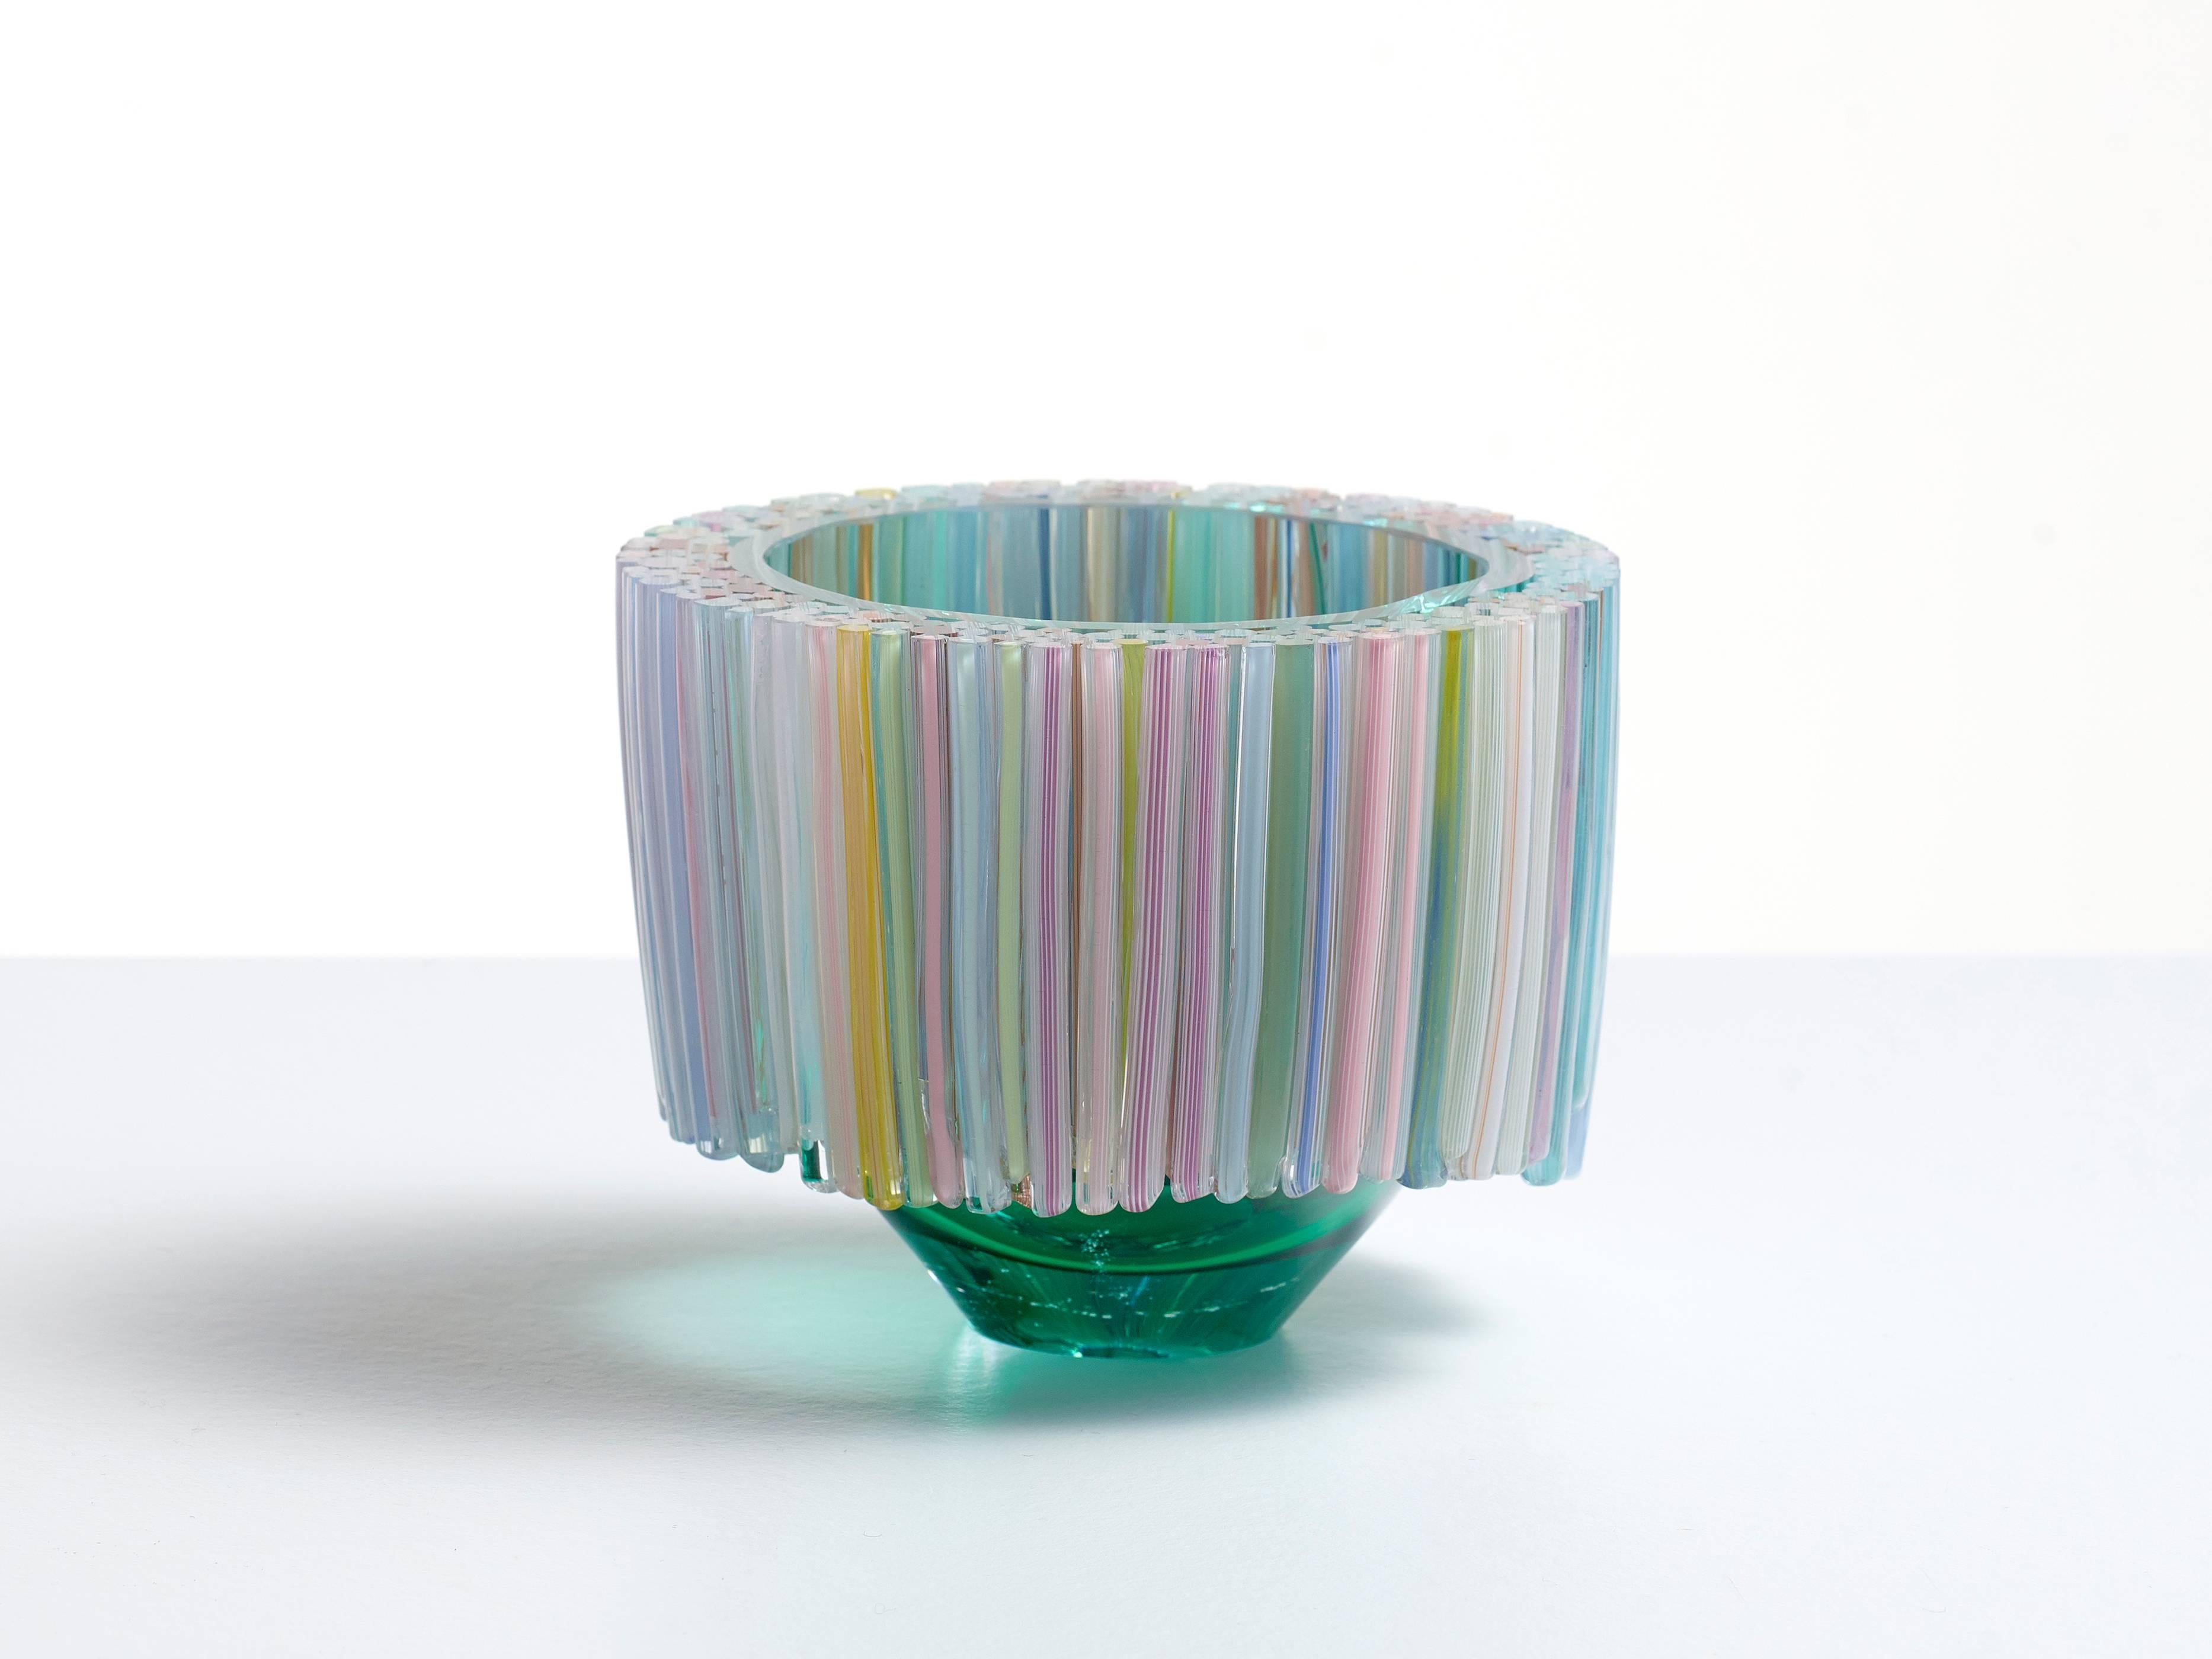 Blown glass green bowl decorated with colorful glass threads, by Sabine Lintzen 1